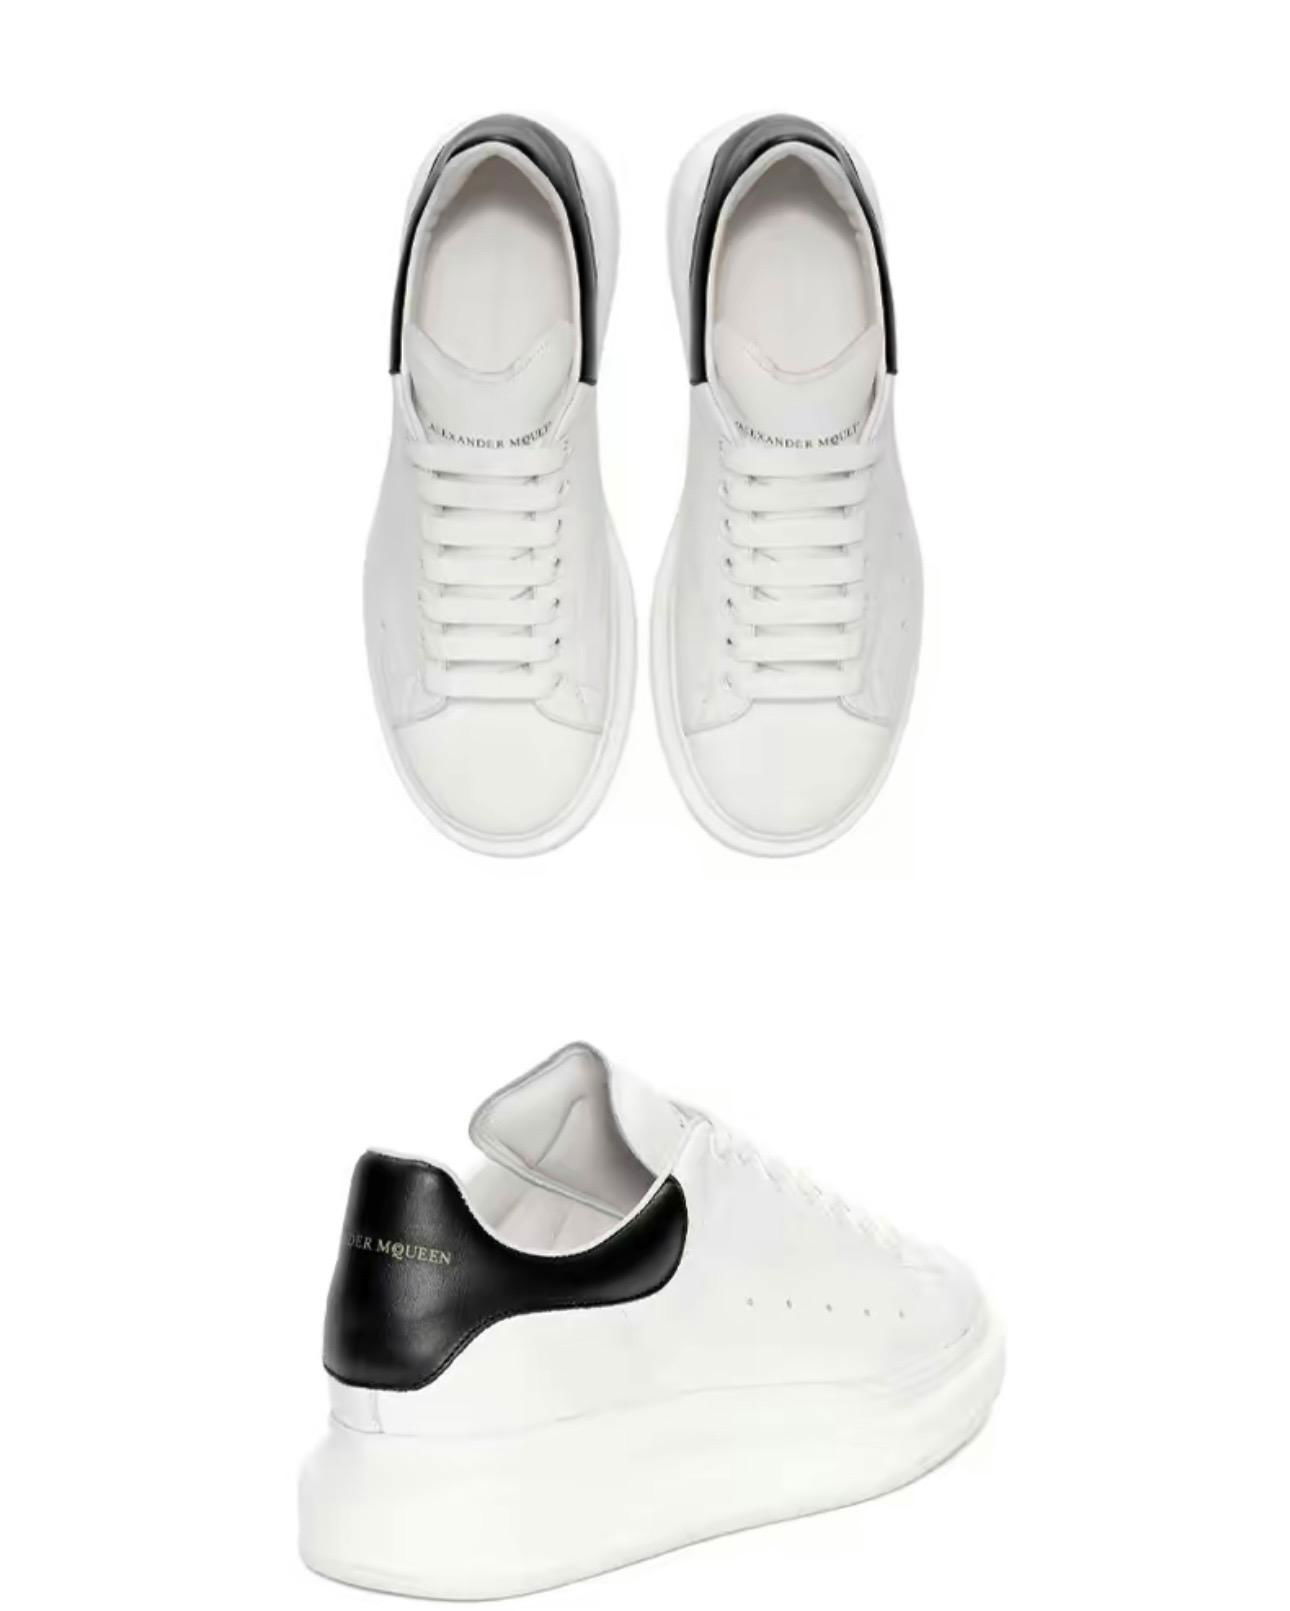 Small white shoes 2